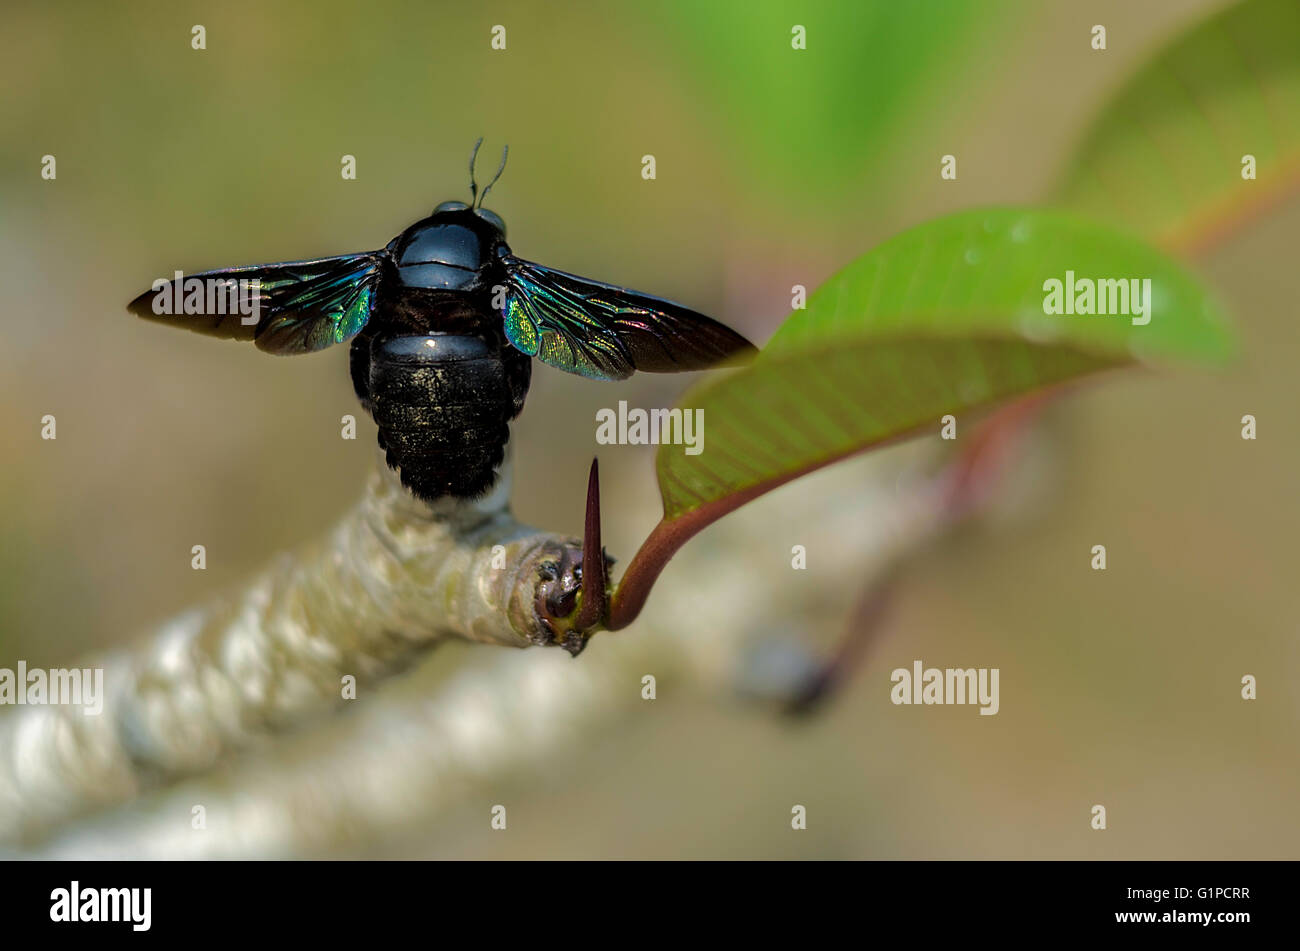 Tropical carpenter bees sitting on the leaf Stock Photo